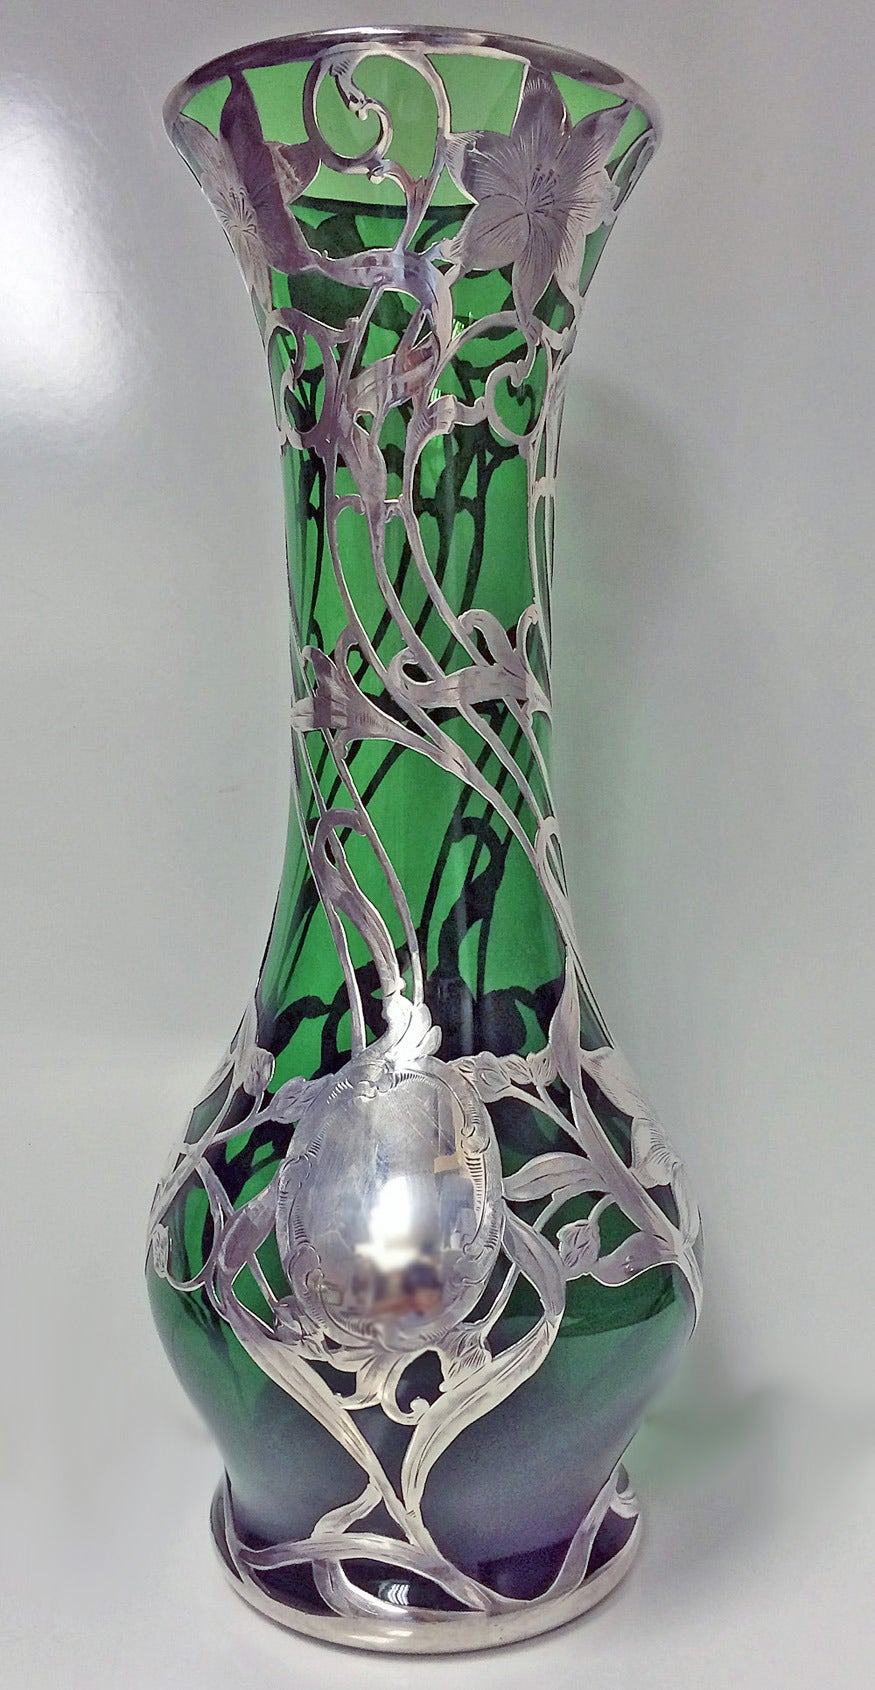 Large Art Nouveau emerald glass vase with Sterling Silver overlay. Made by Alvin, Providence, C. 1900. The Vase of slightly bulbous tapering form, everted rim. Thick applied silver overlay in form of lush and open blossoms with whiplash stems and